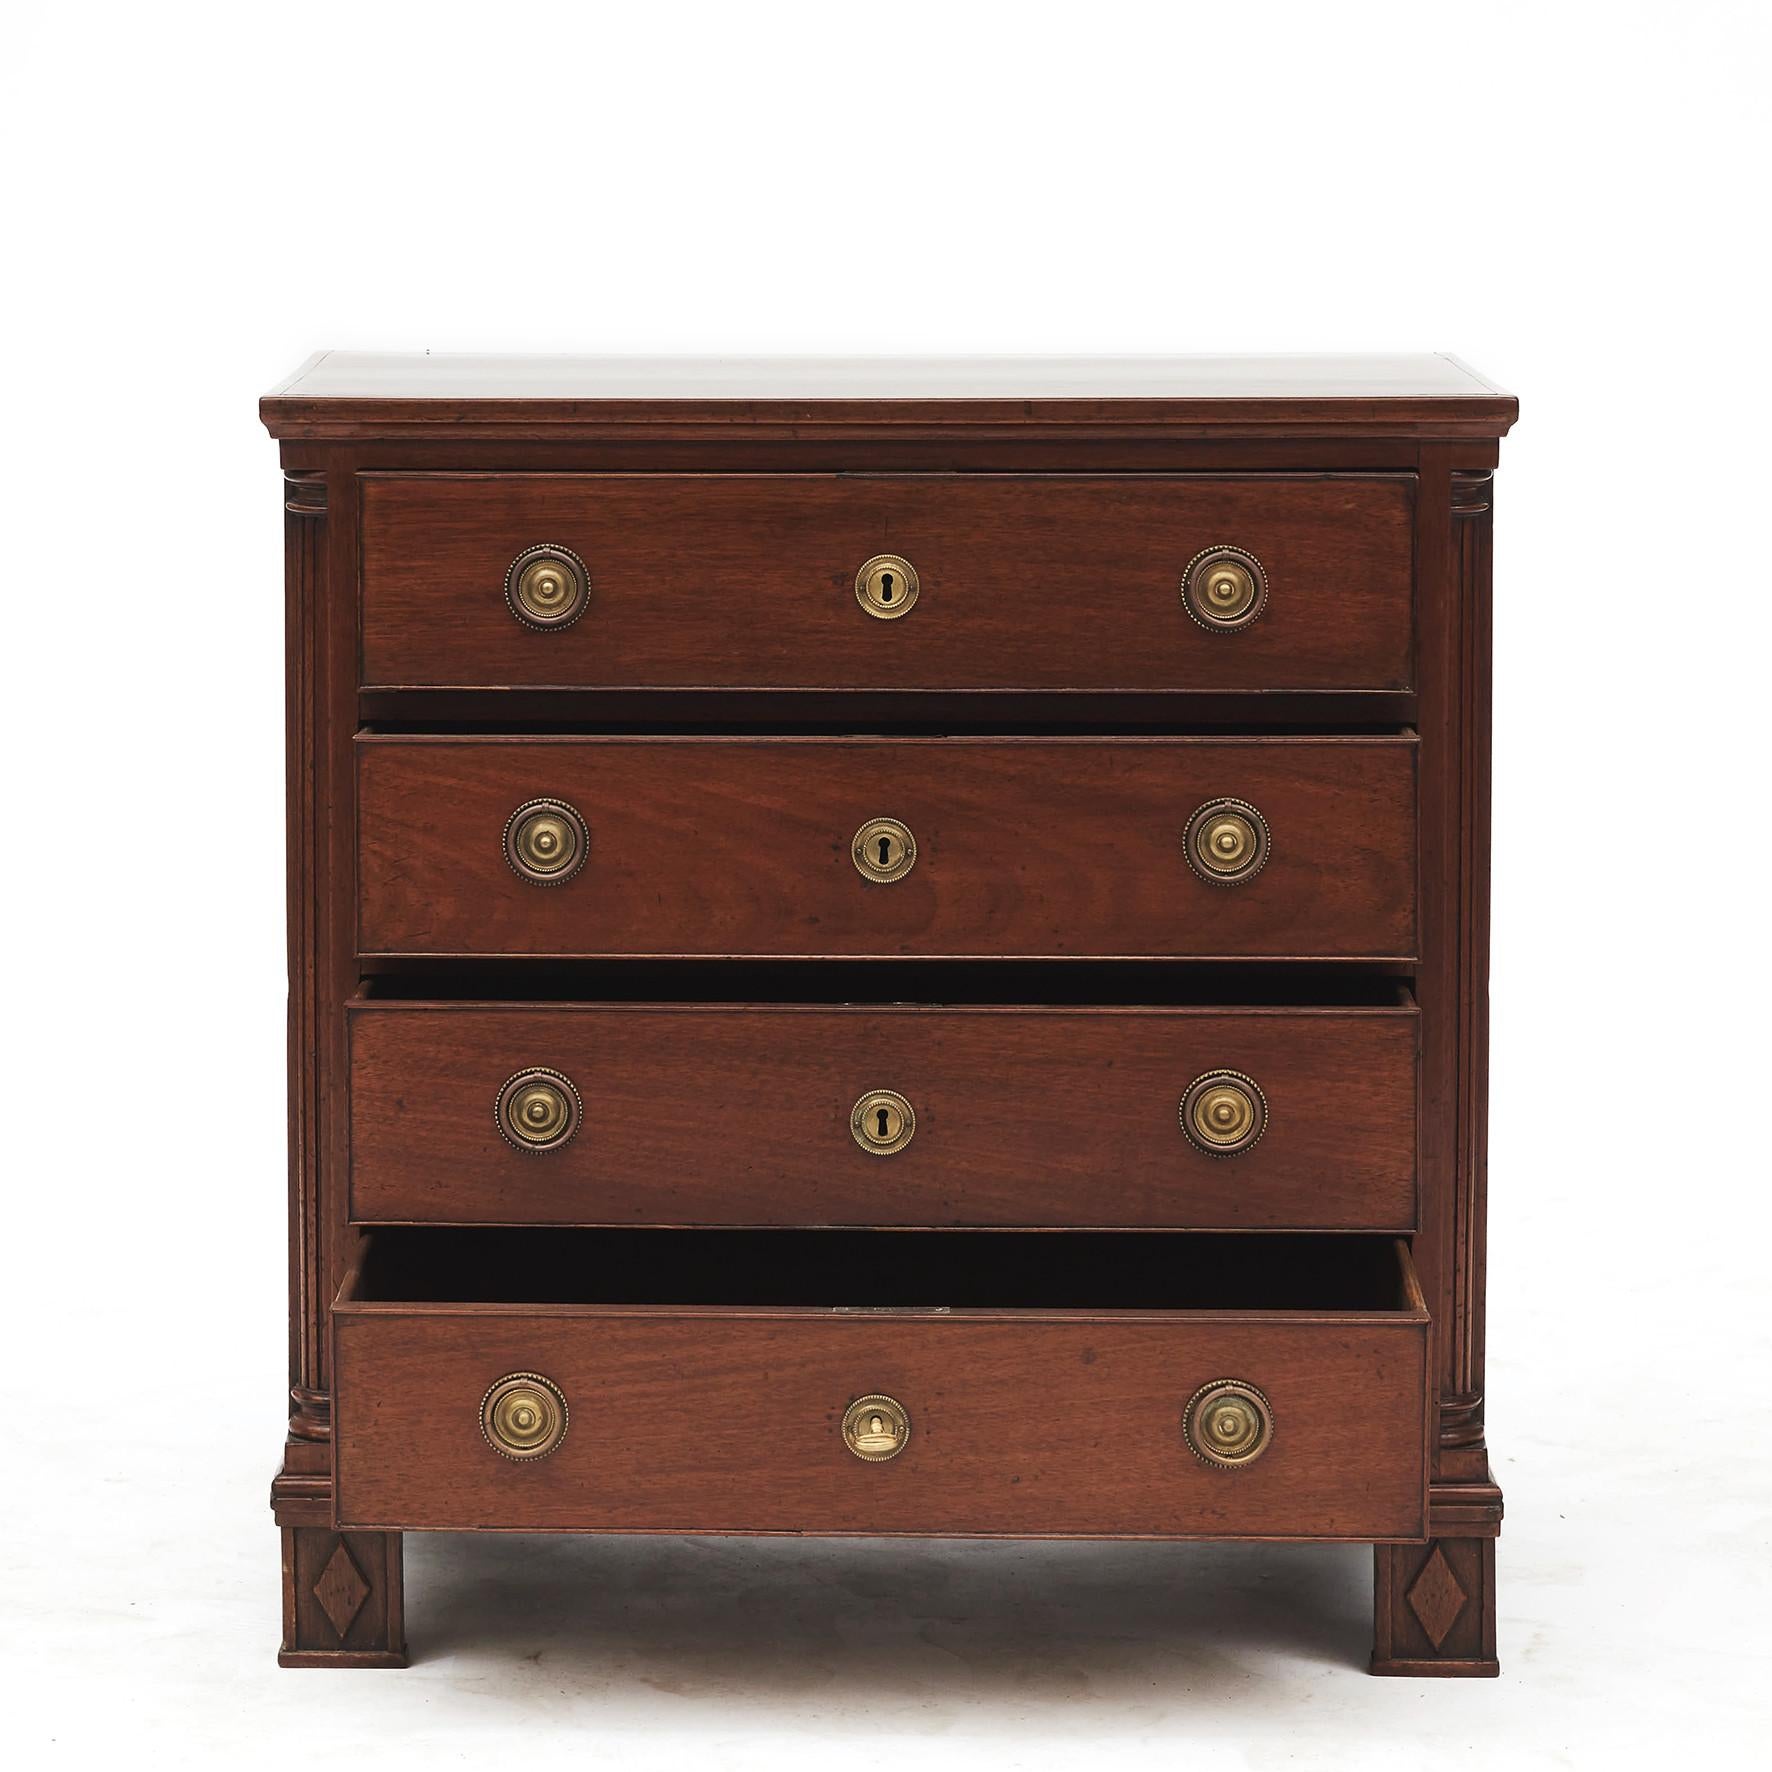 Danish Louis XVI chest of drawers or commode.
Cuban mahogany veneered on oak.
Four drawers, the sides are flanked by a pair of fluted quarter columns. Supported by legs with elegant rhombus details.
Copenhagen 1780-1800.